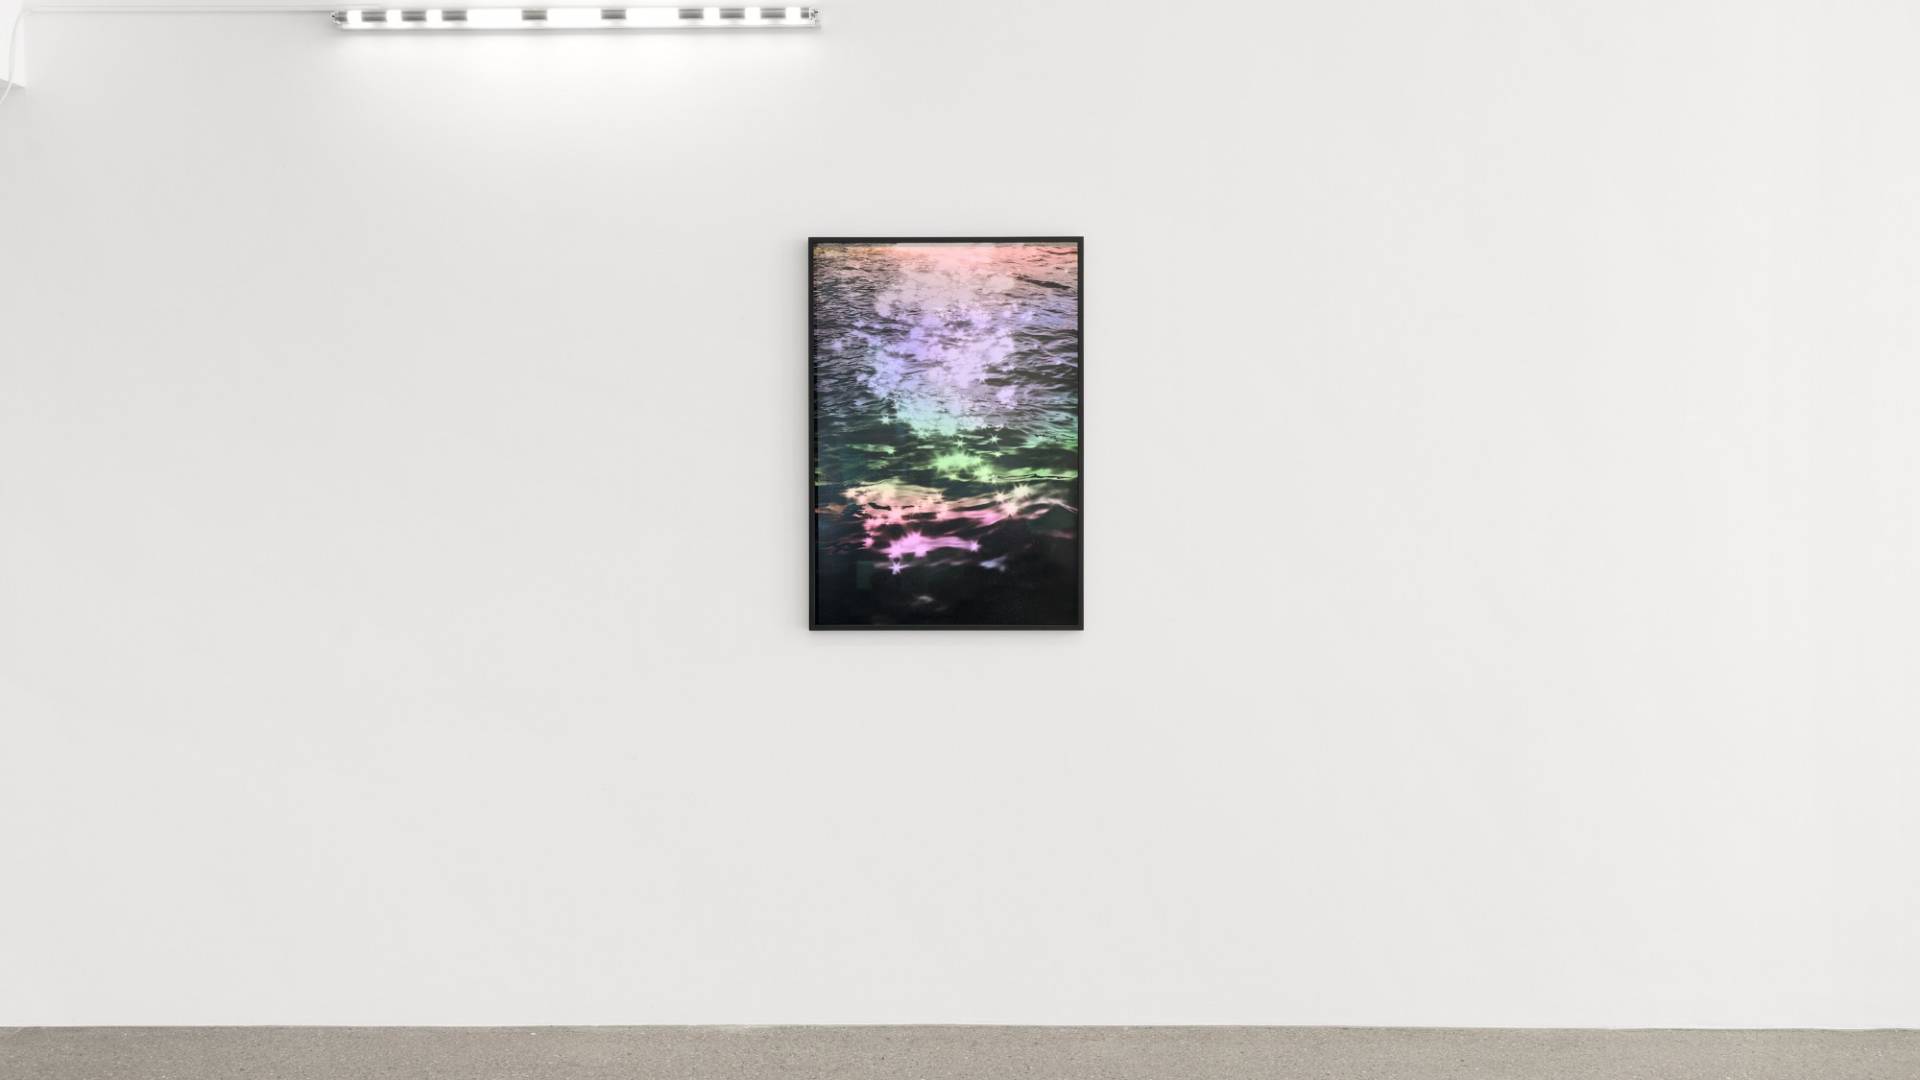 In the centre hangs a picture of the surface of a glittering, multi-coloured sea. Above this to the left a fluorescent tube represents the SOS international distress call.